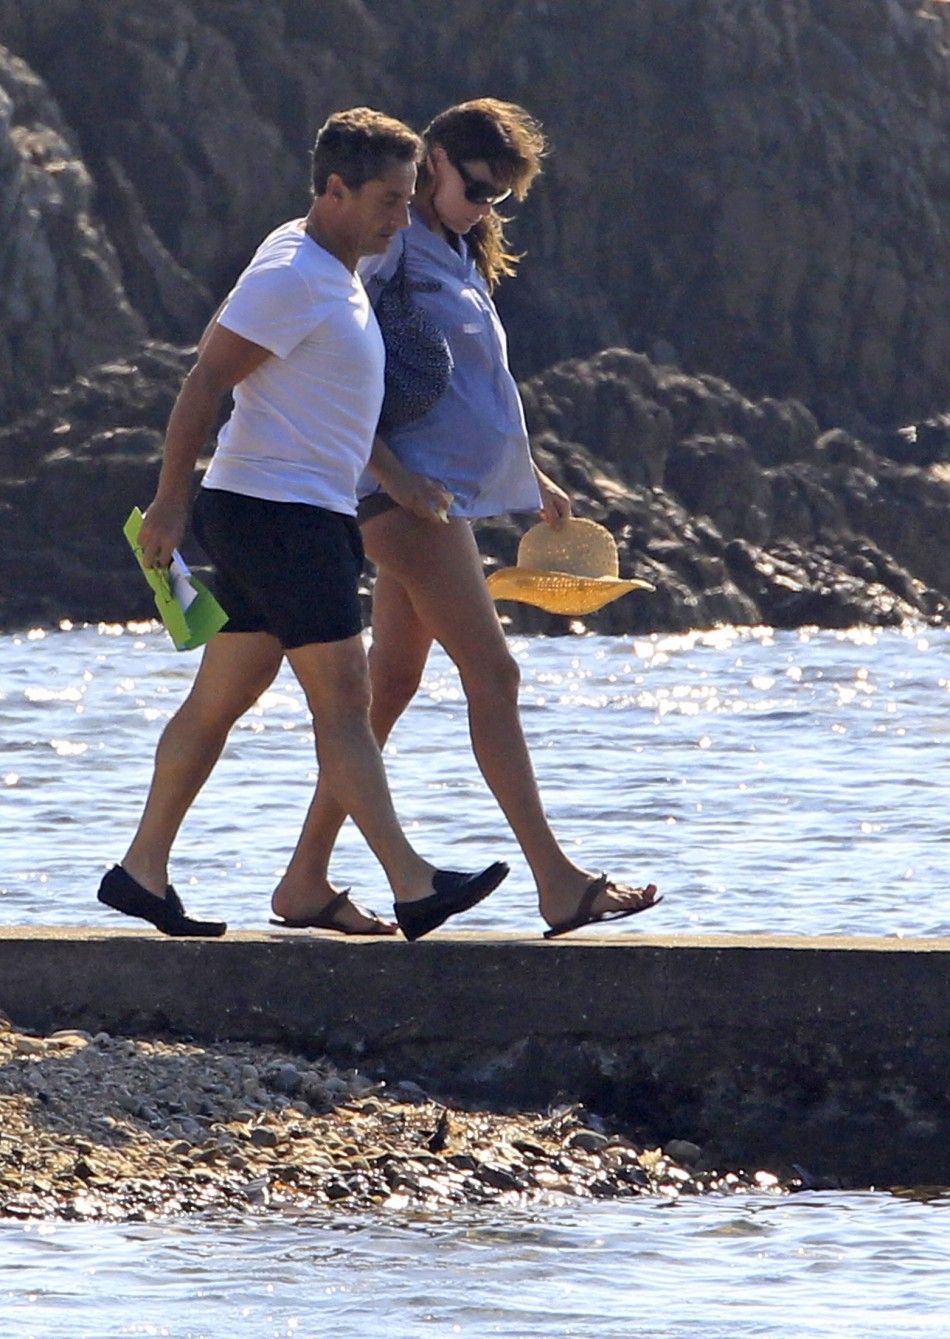 Holidaying Carla Bruni Reveals her Pregnant 039Rounded039 Belly on the Beach